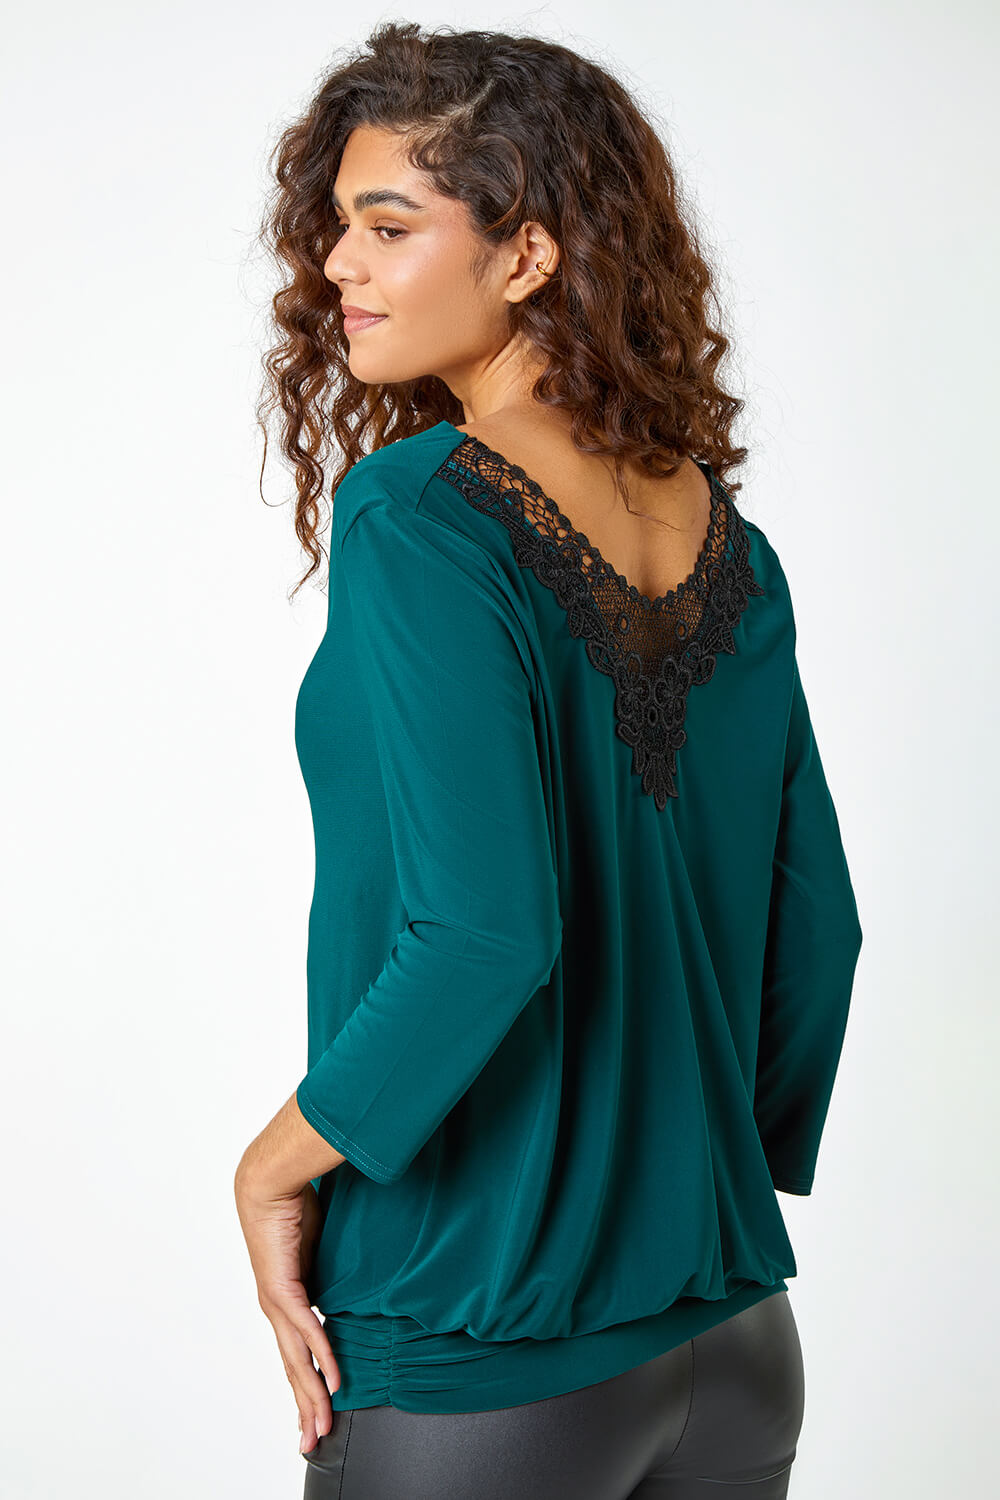 Lace Back Cowl Neck Stretch Top